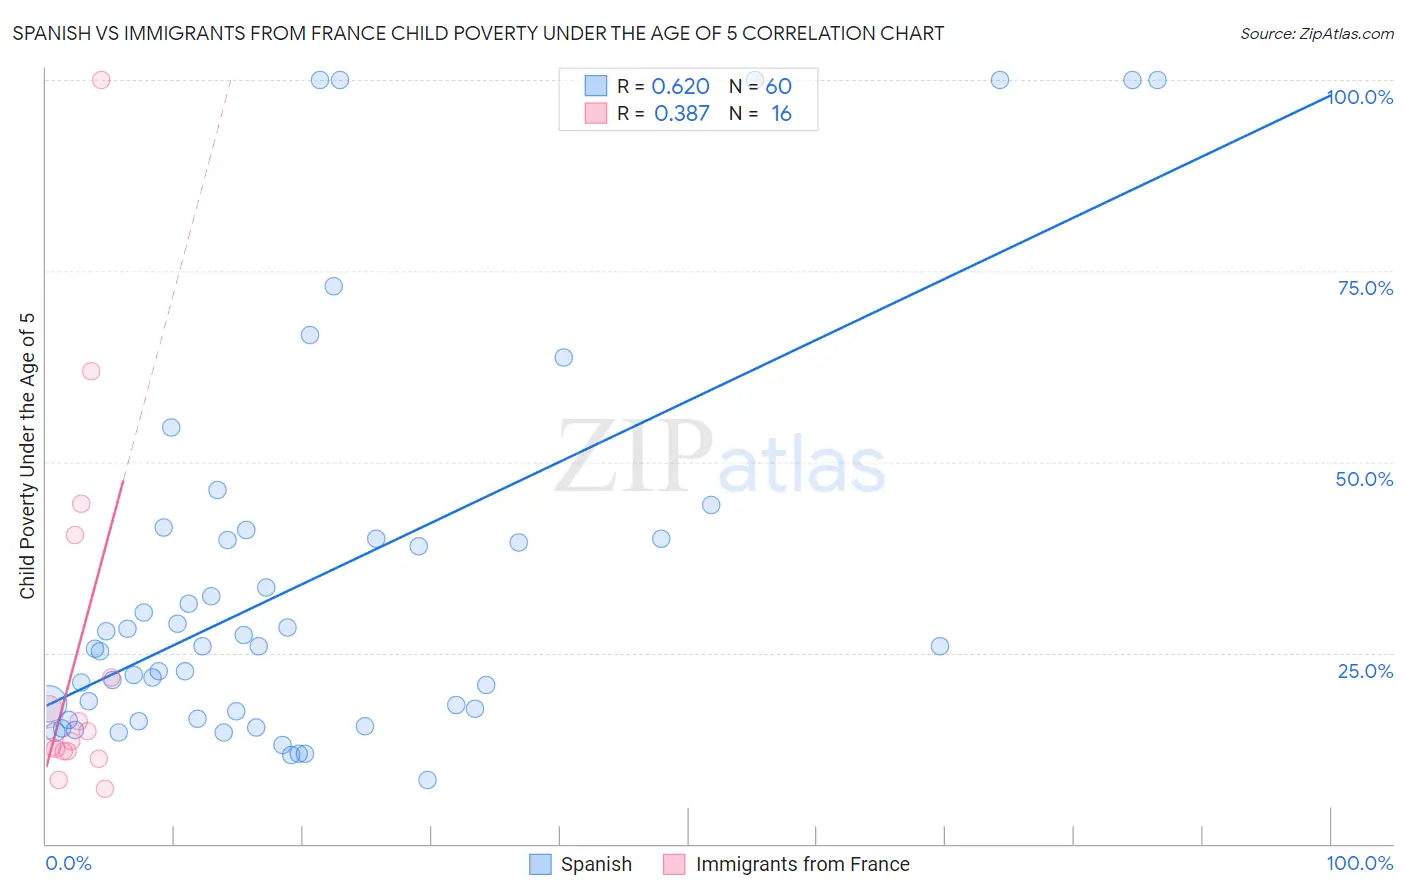 Spanish vs Immigrants from France Child Poverty Under the Age of 5